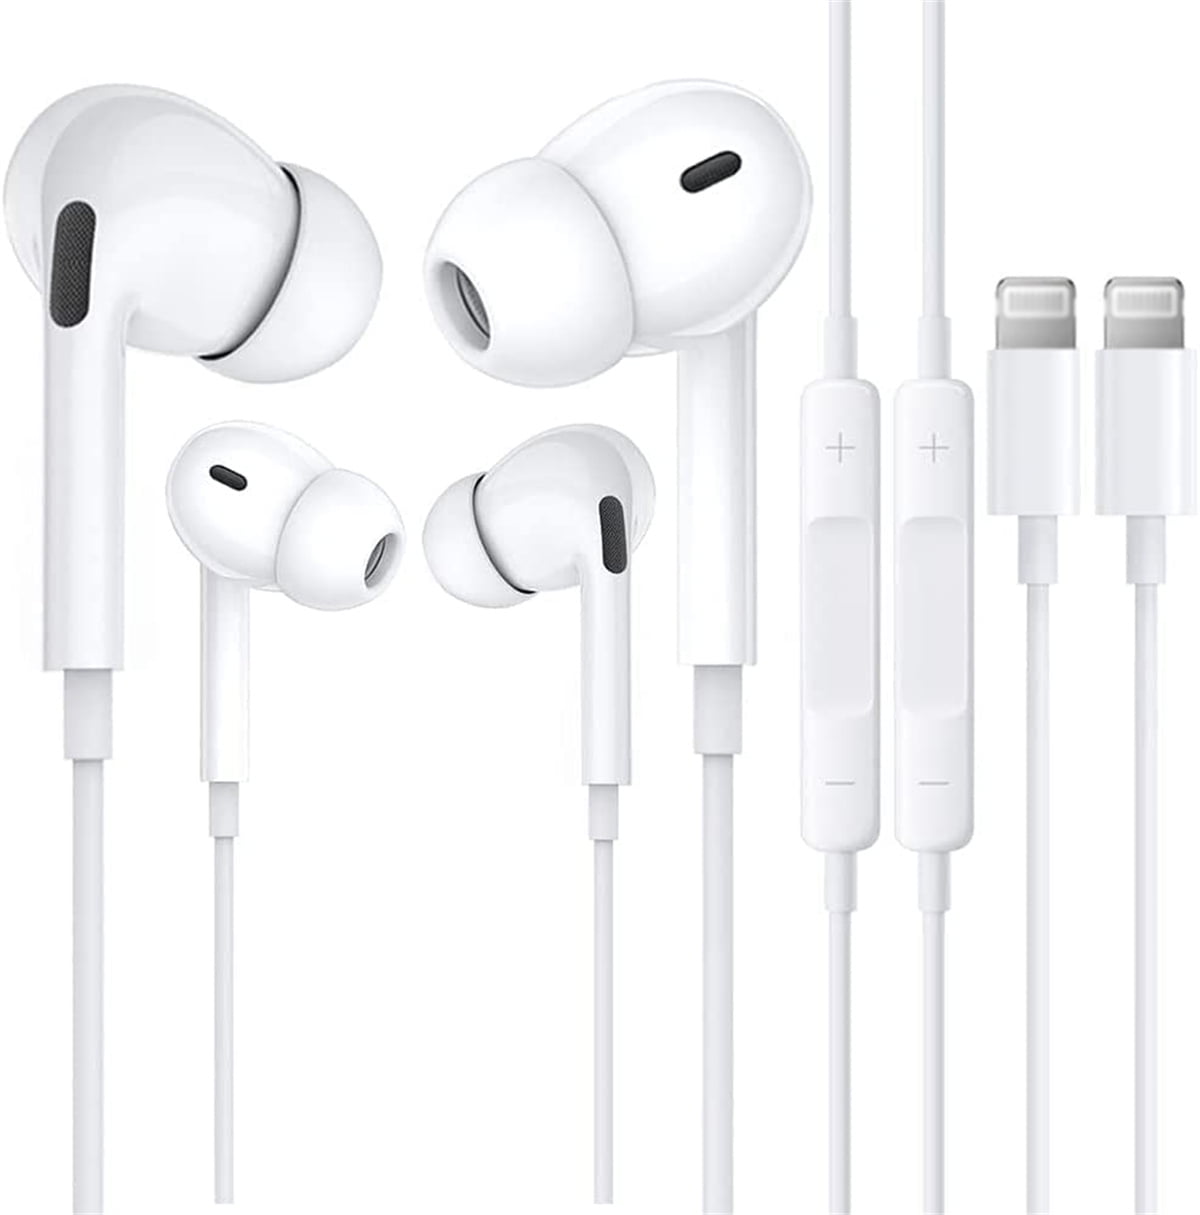 White In-Ear Headphones for iPhone,Headphones with Cable and Microphone,HiFi Stereo Noise Cancelling,Supports Volume Control and Calls,Suitable for iPhone 8/X/XS Max/XR/11/12 Supports All iOS Systems 